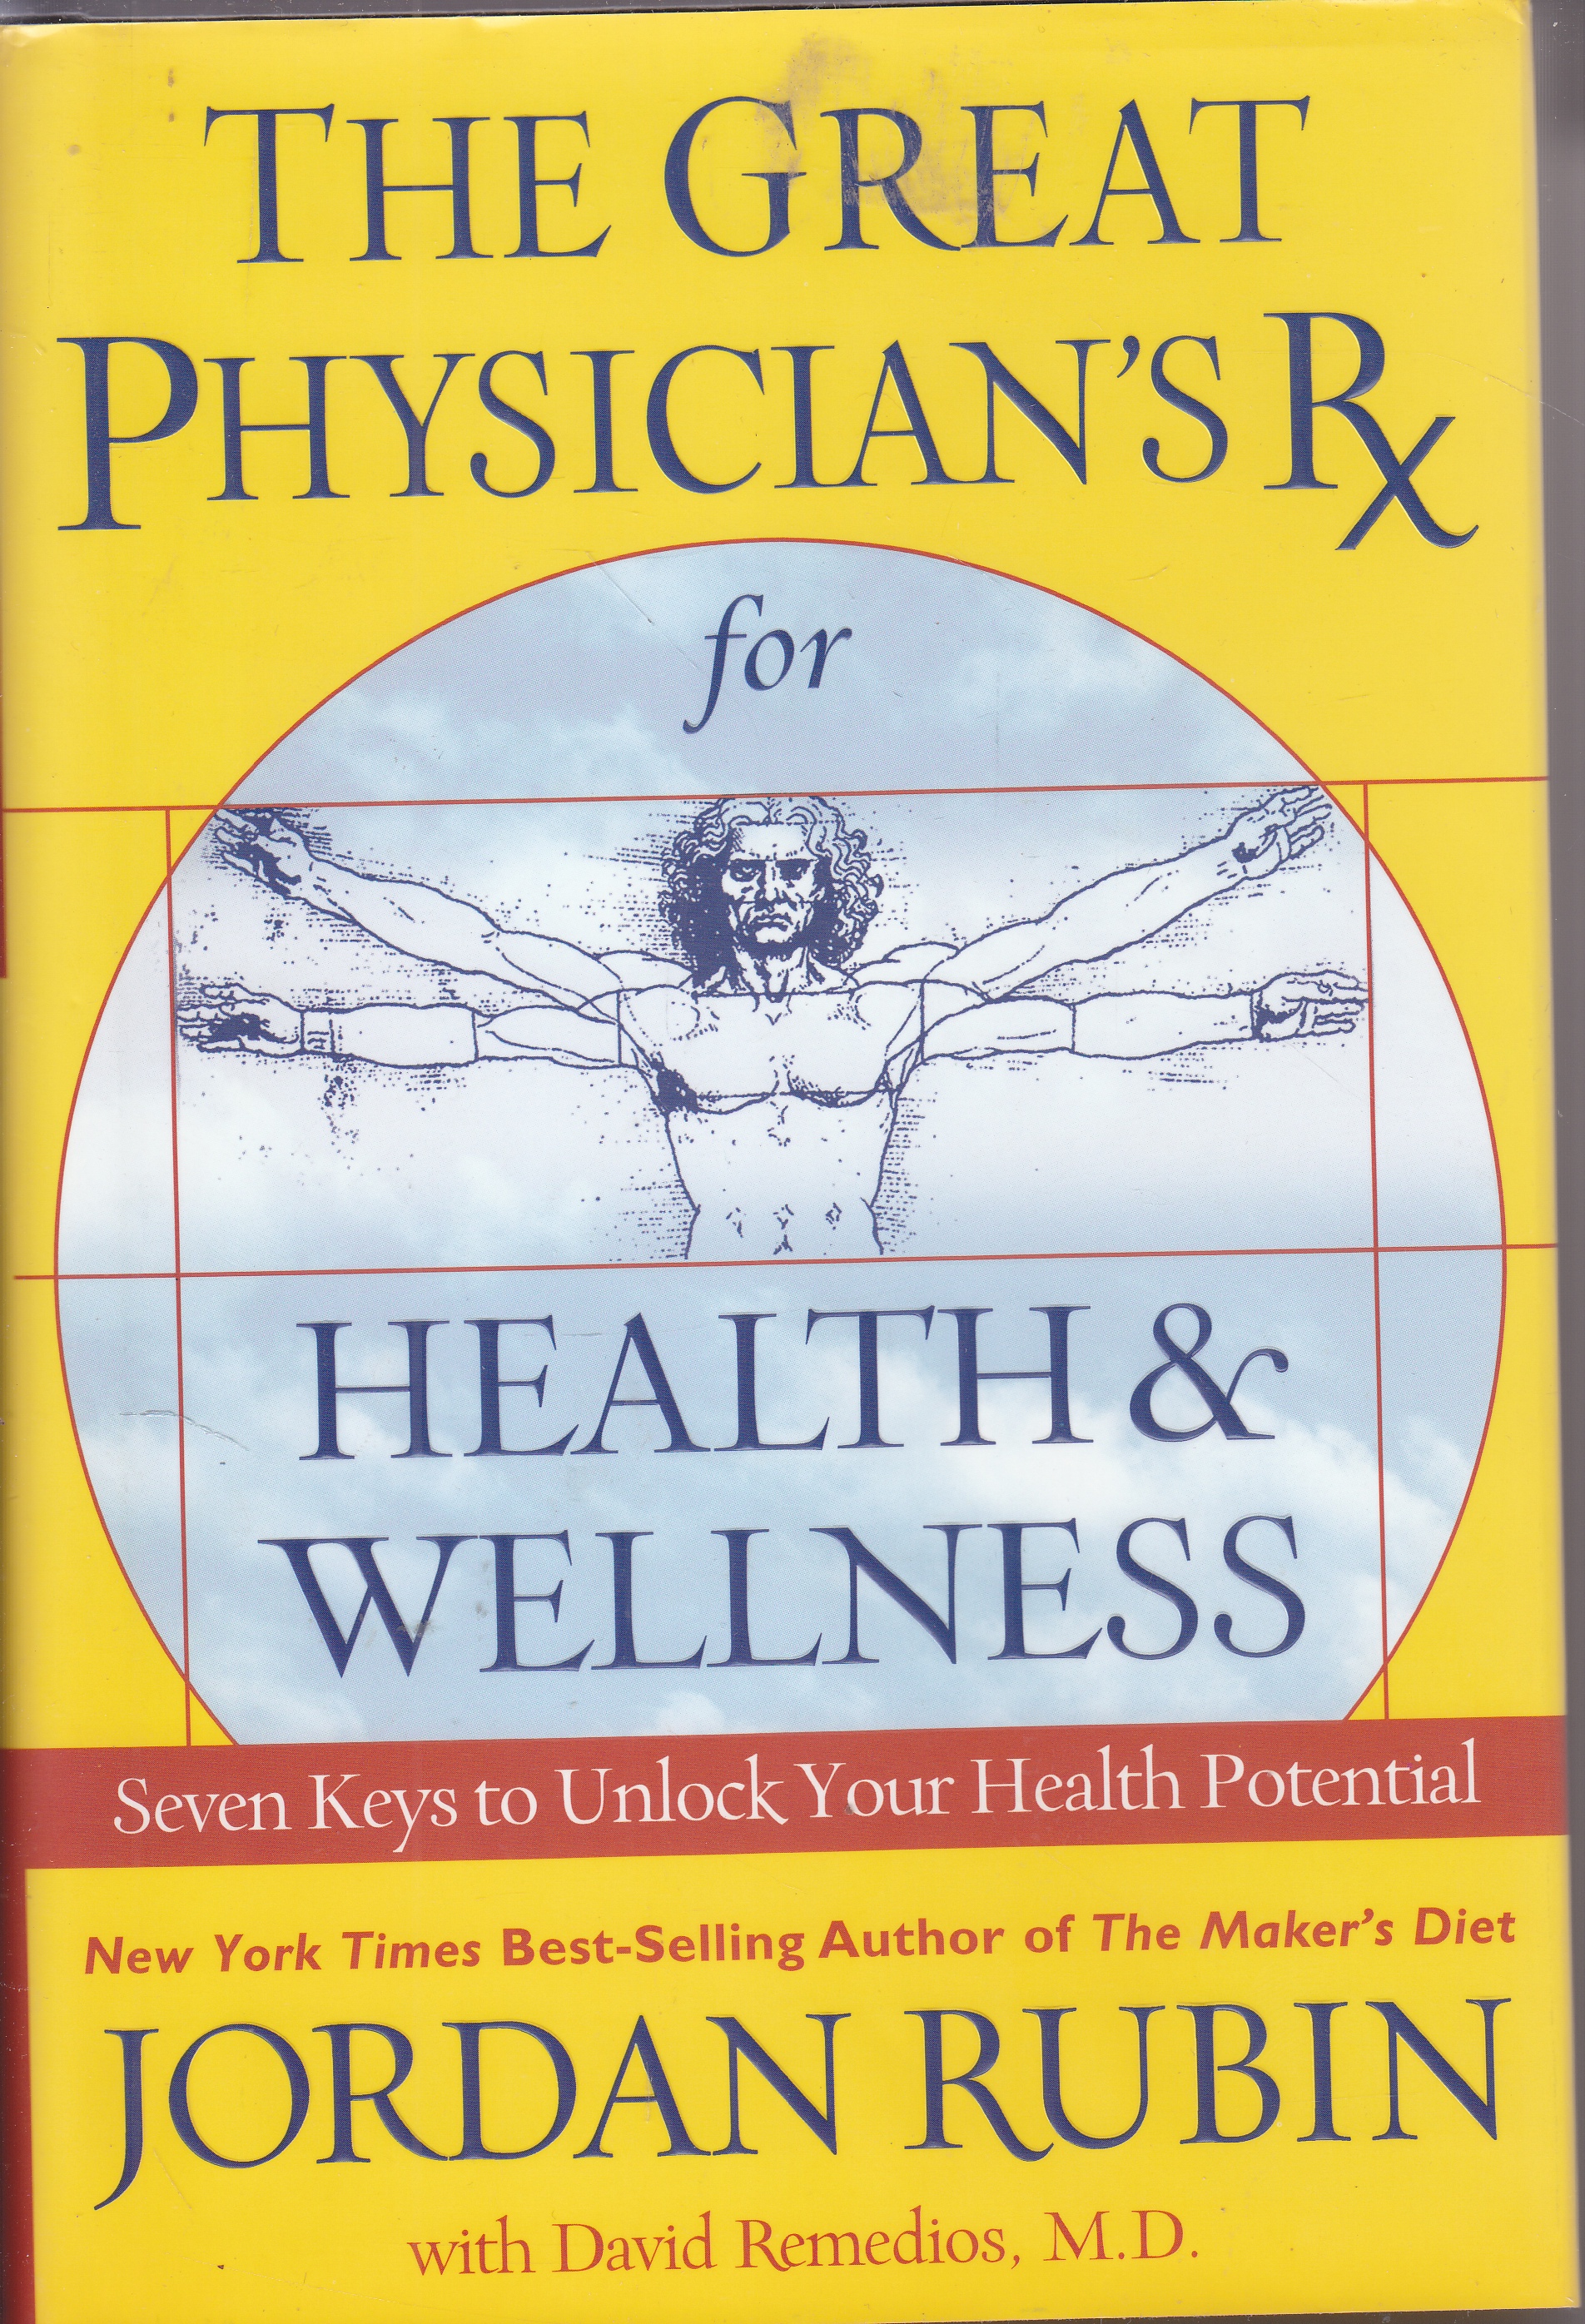 Image for The Great Physician's RX for Health & Wellness Seven Keys to Unlock Your Health Potential